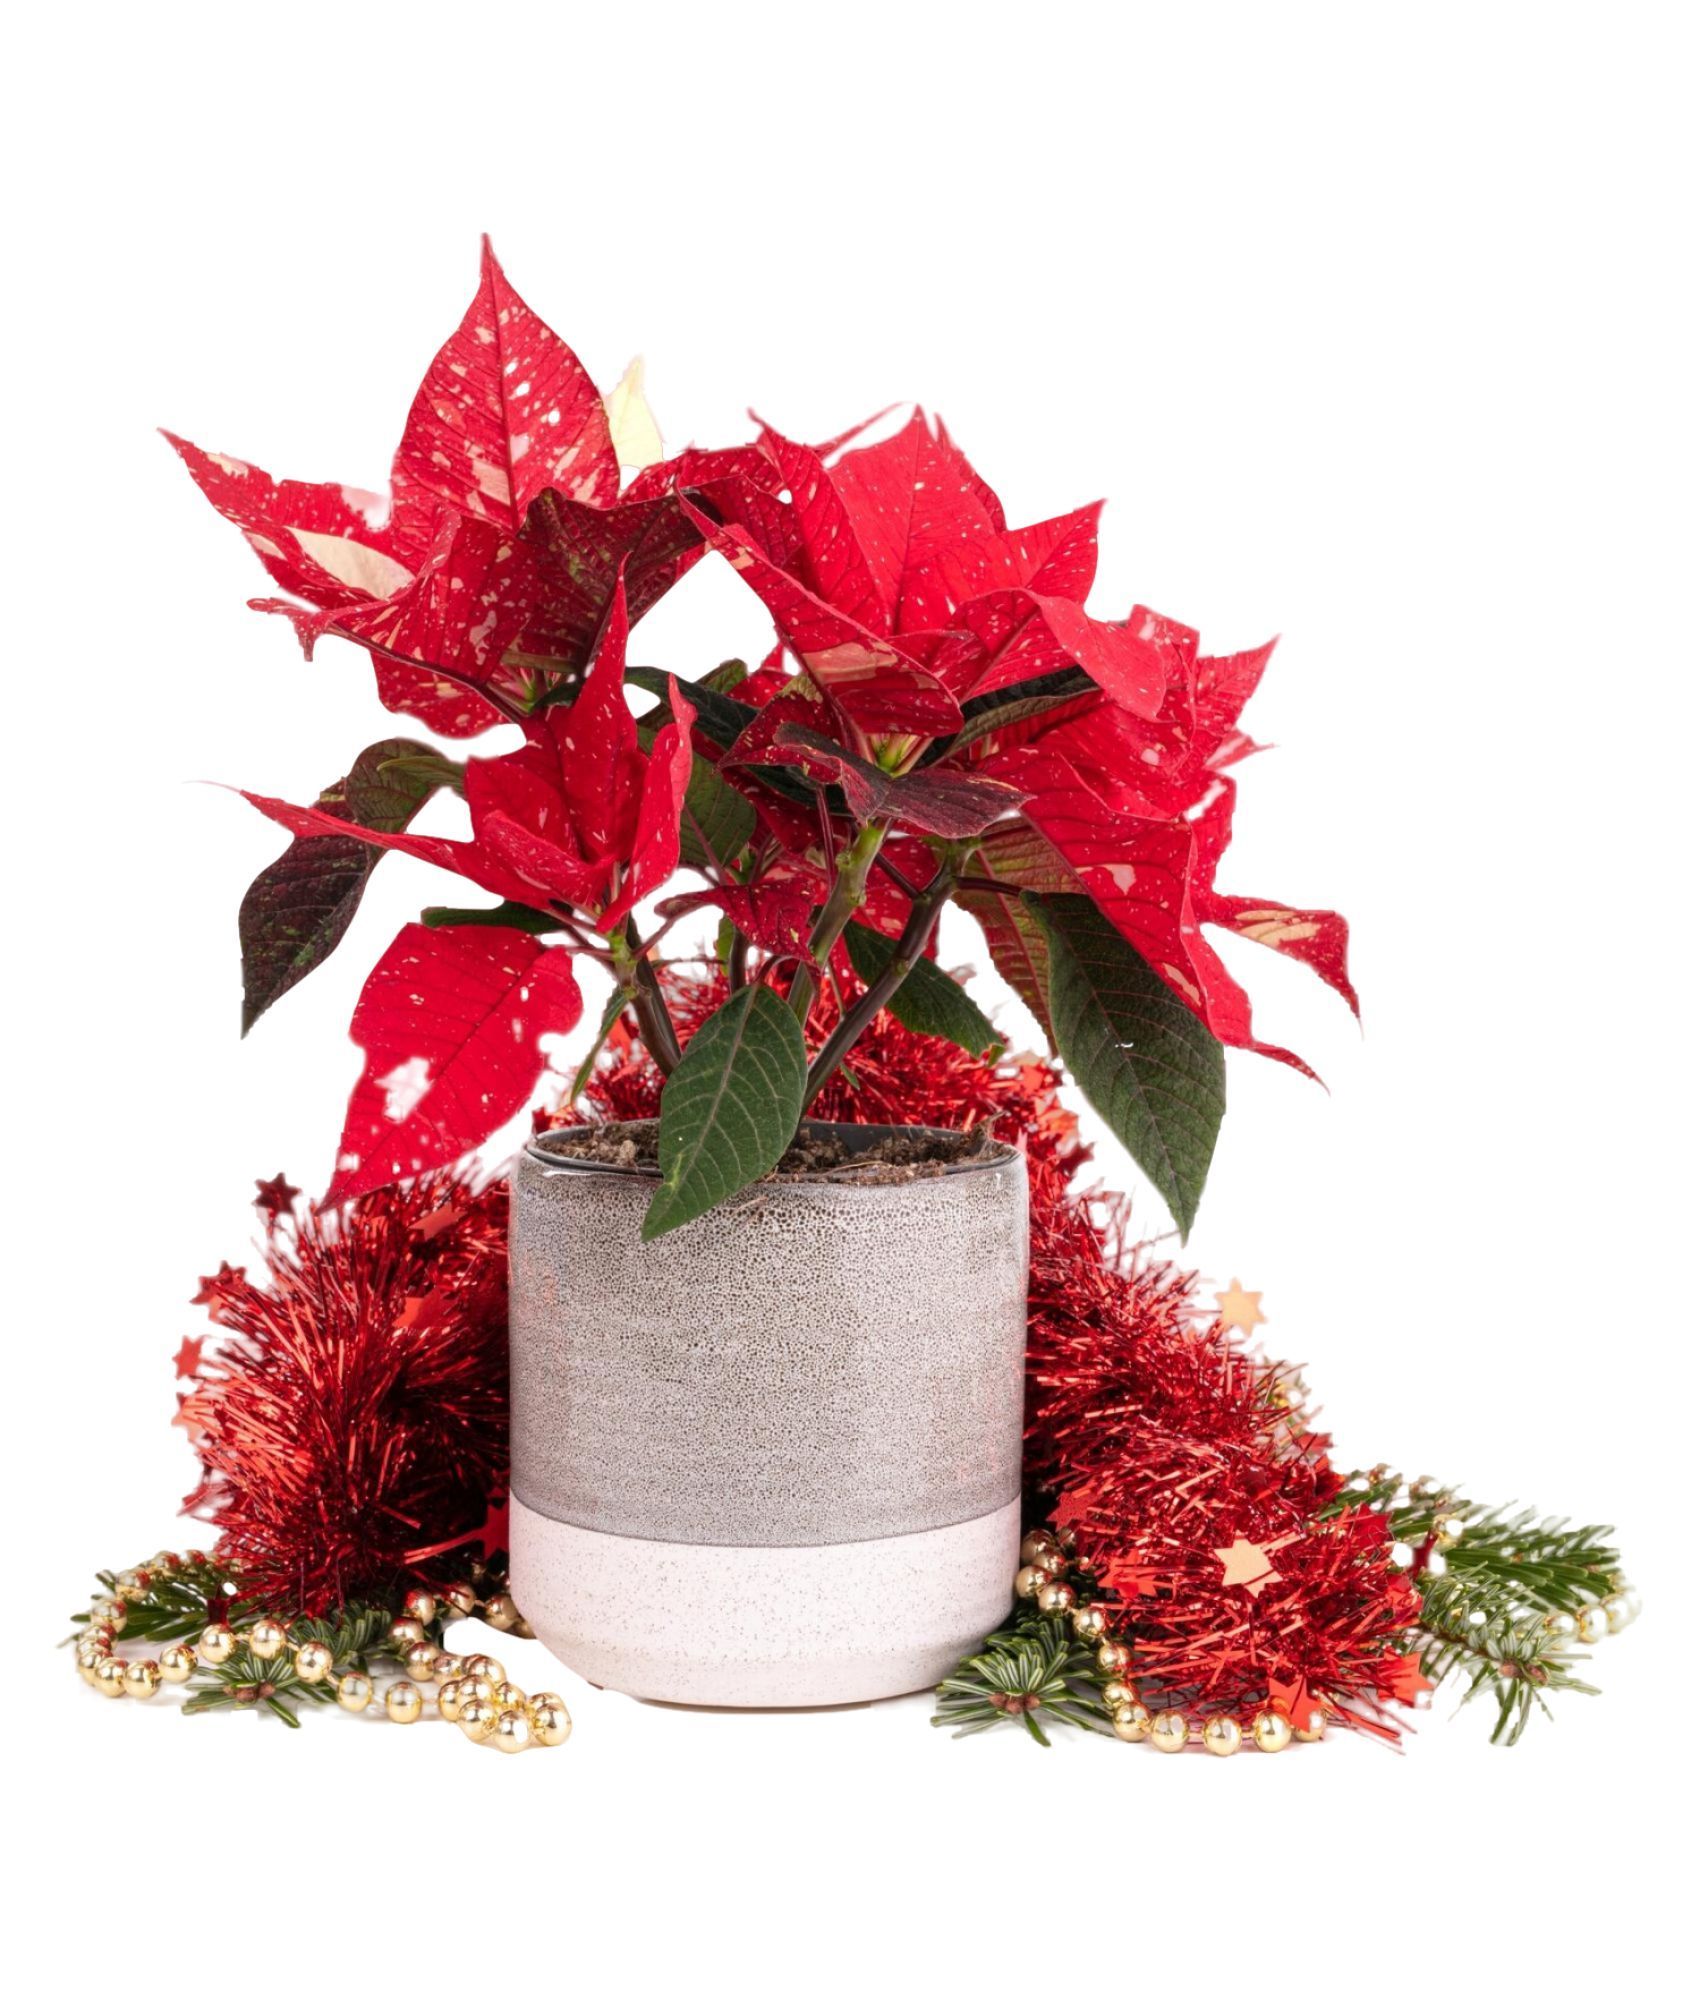 a potted plant with red leaves is surrounded by red tinsel